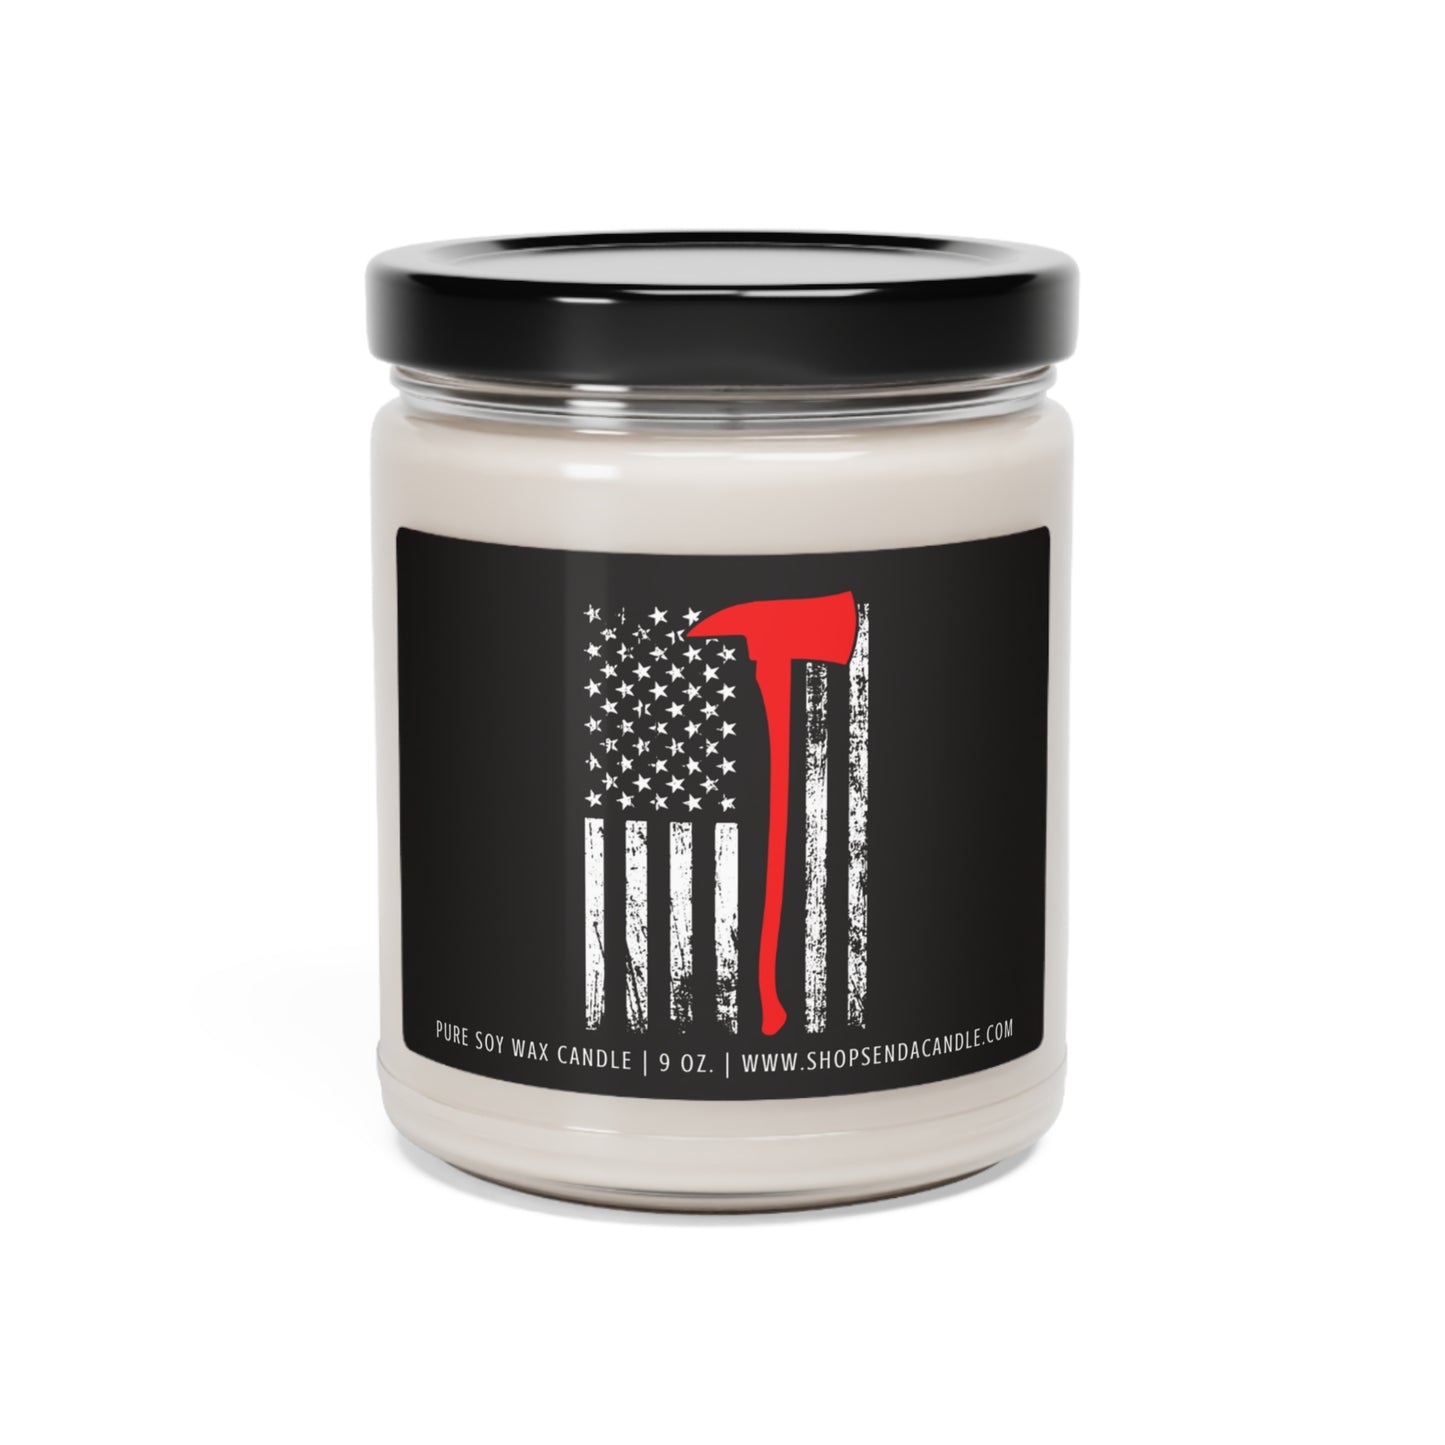 Retired Firefighter Gifts | Send A Candle